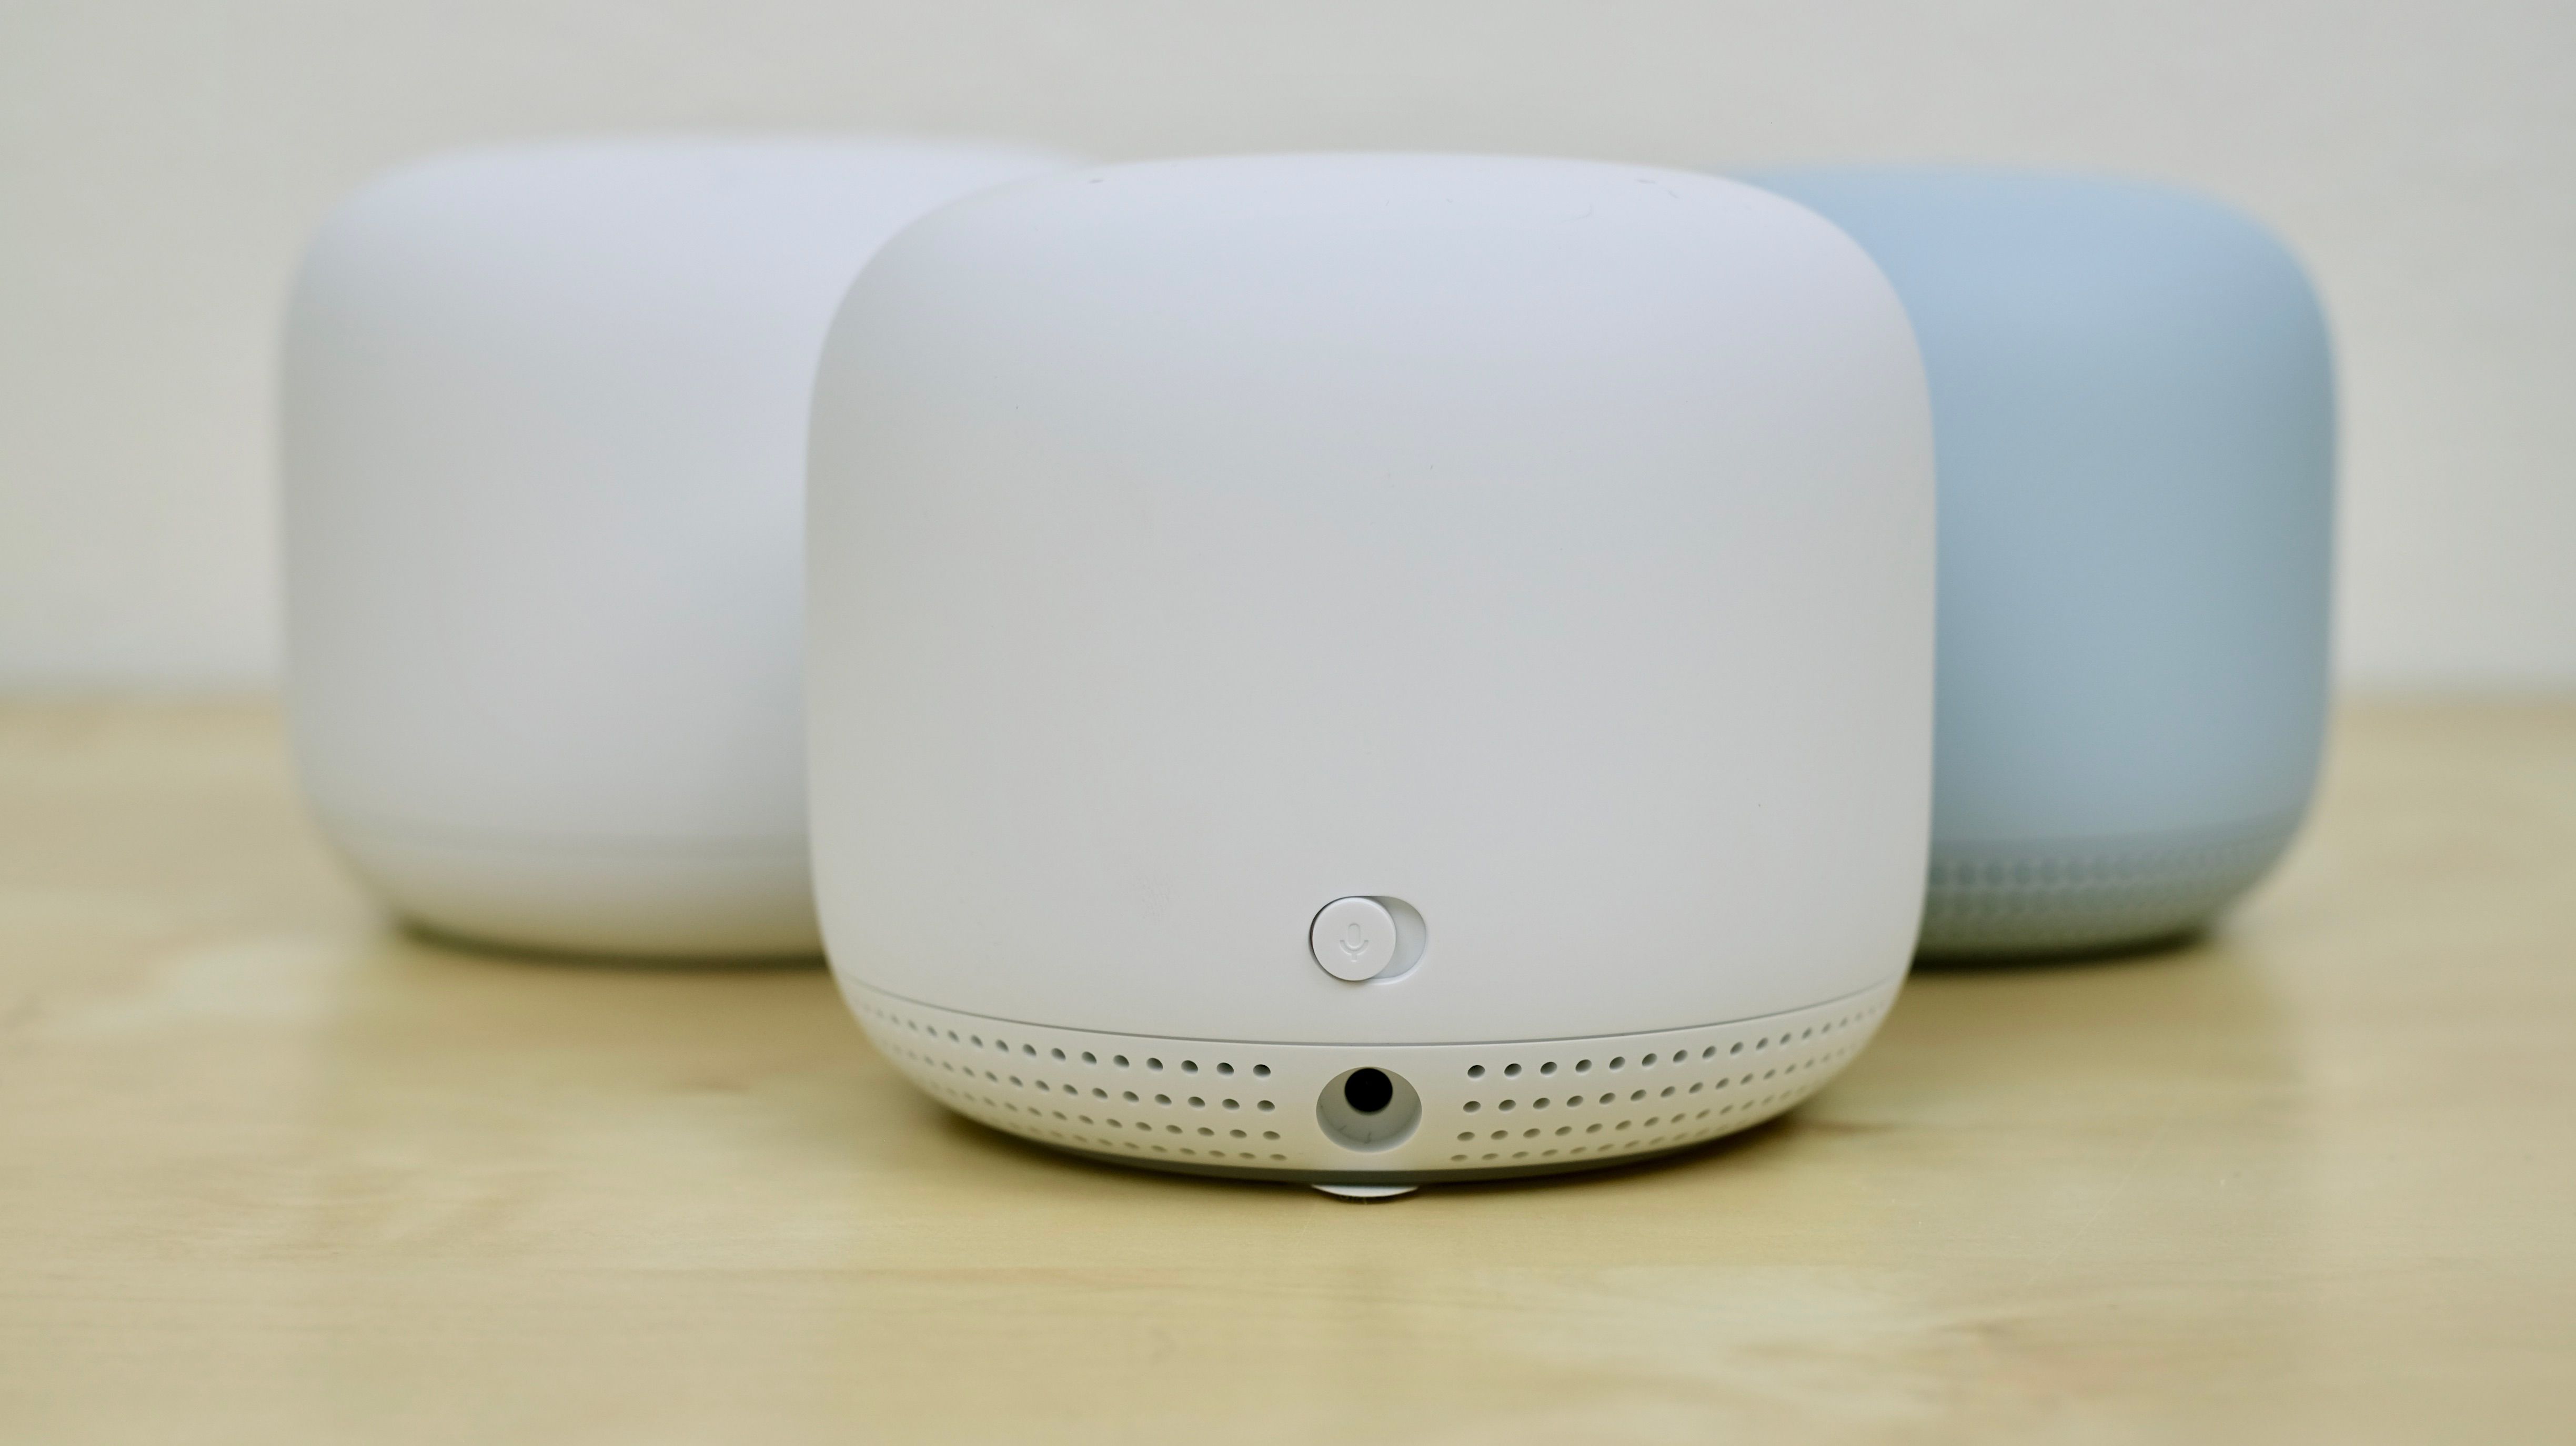 Google defends its use of Wi-Fi 5 in Nest Wifi